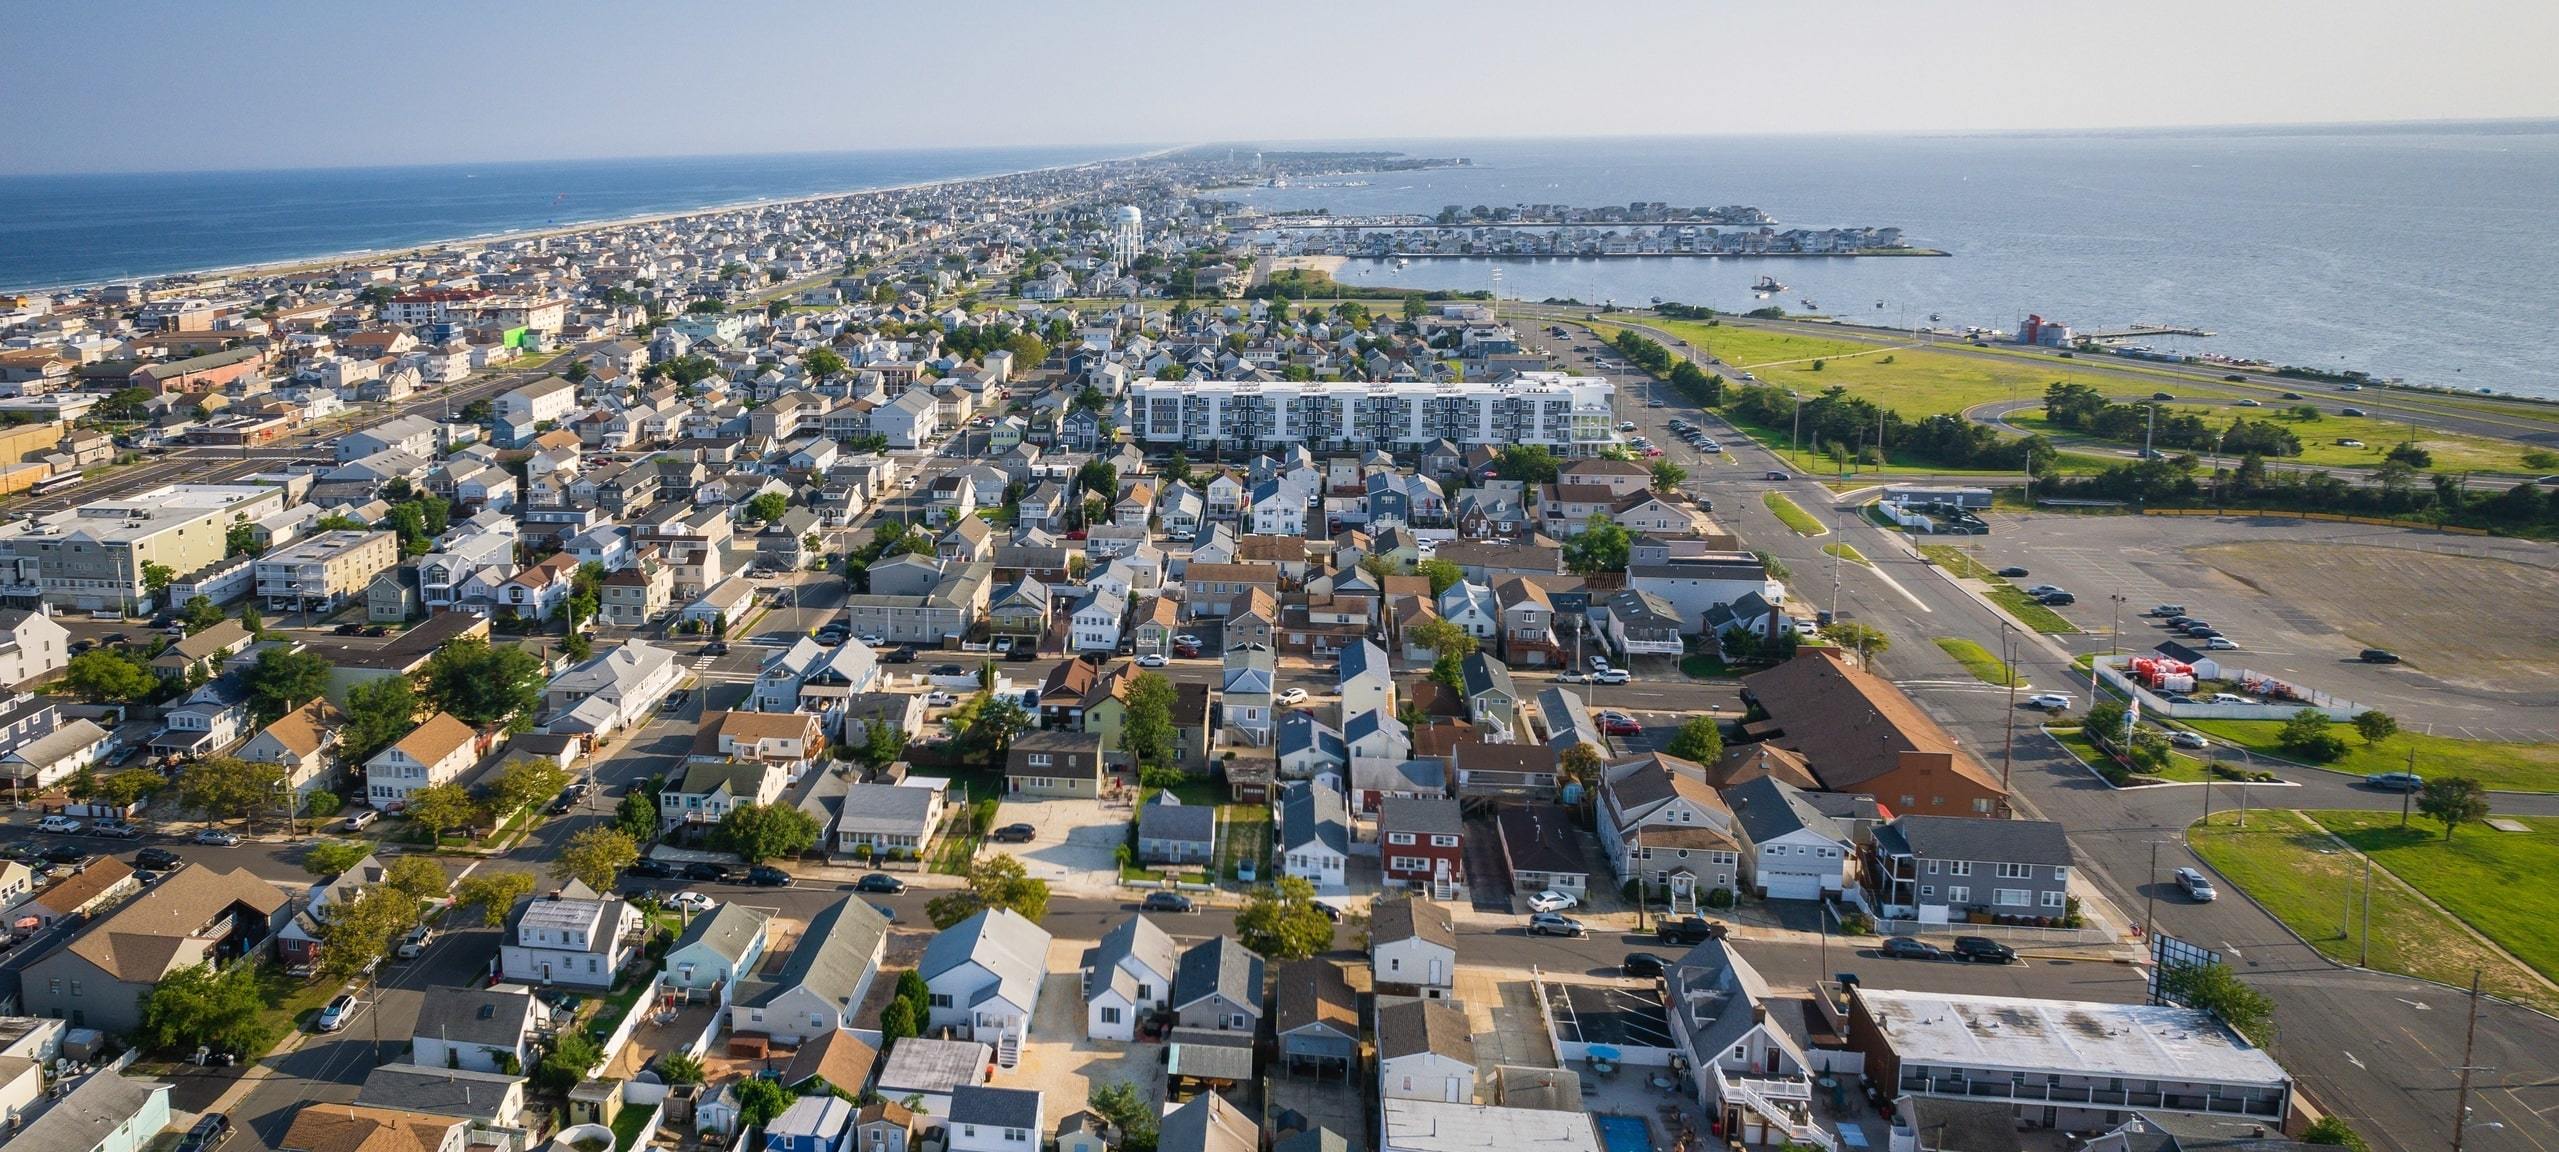 Aerial view of Seaside Park, NJ during a sunny summer day